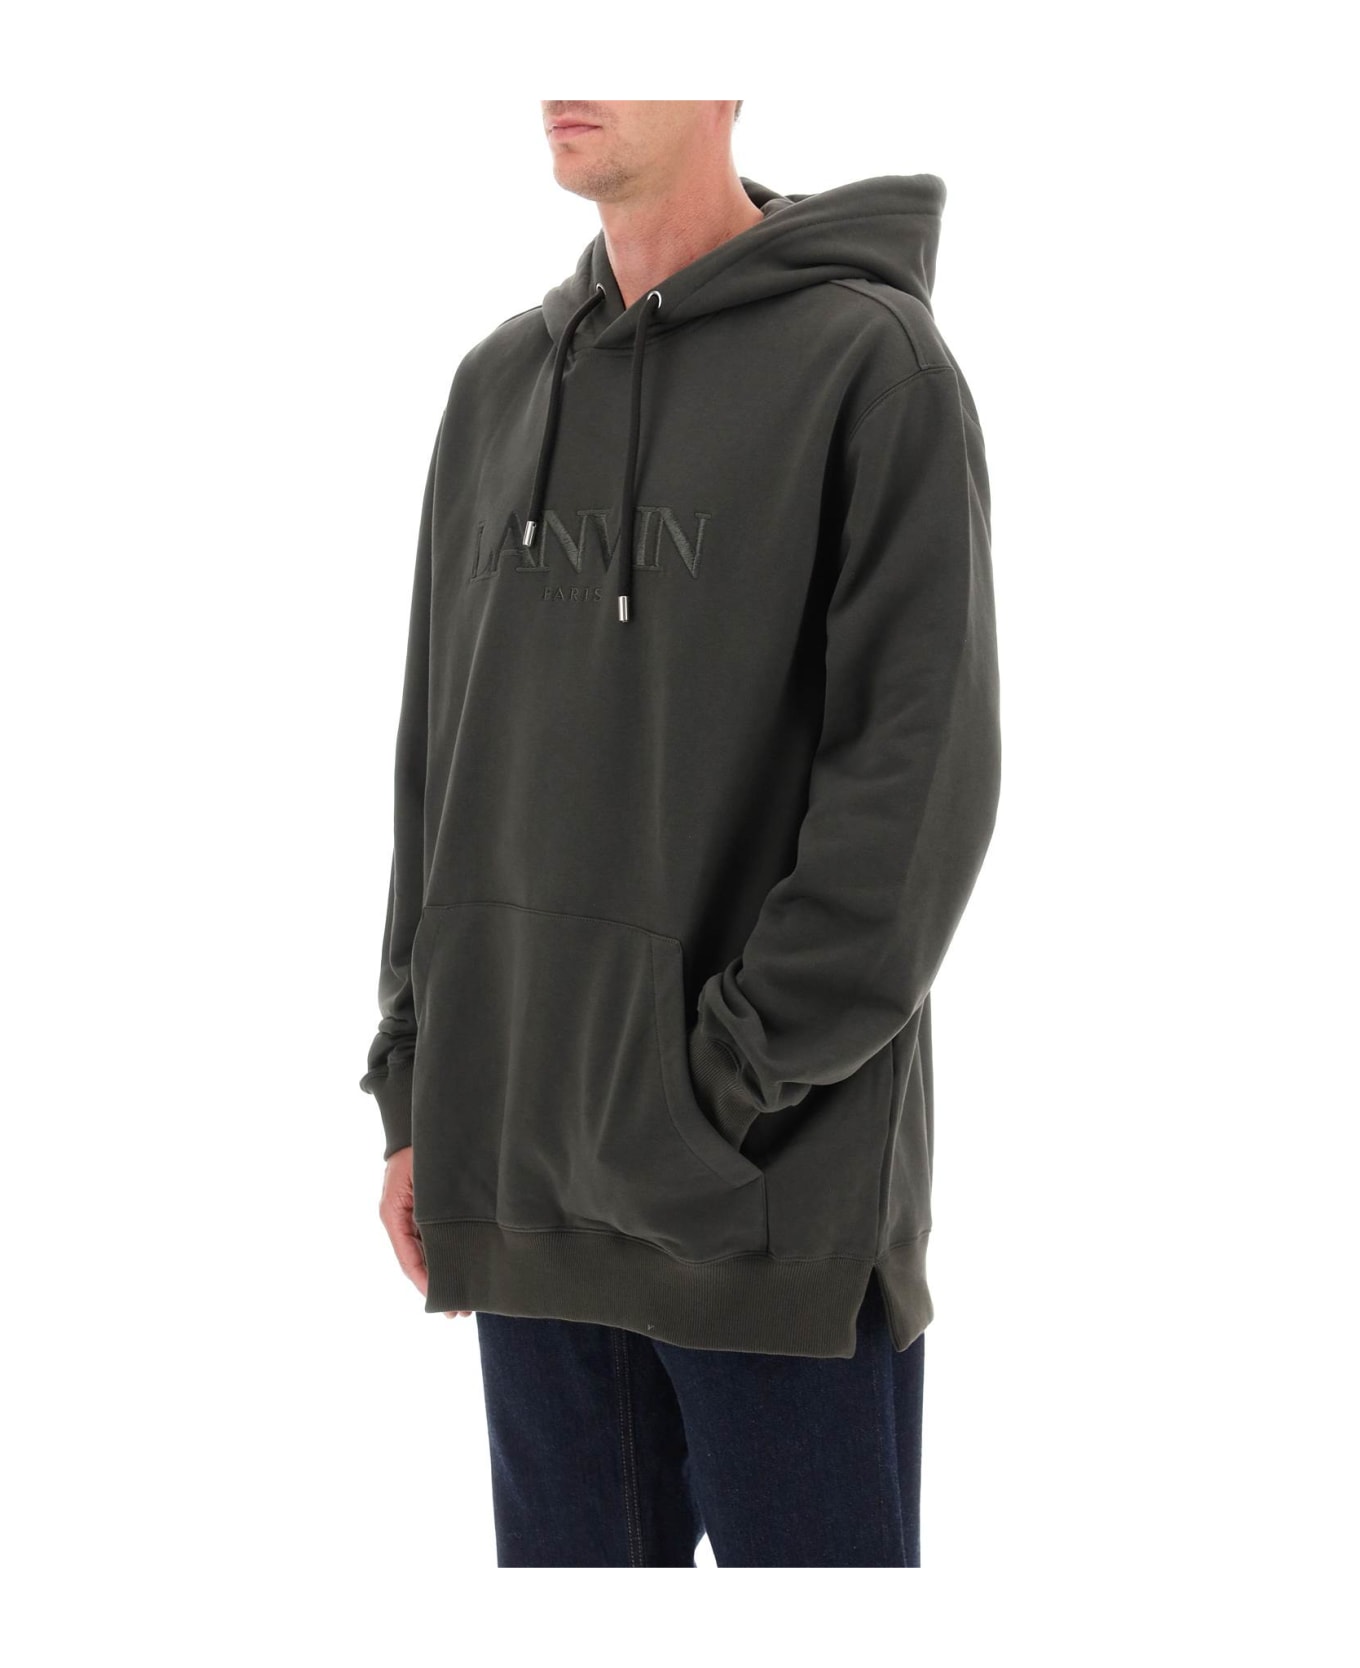 Lanvin Hoodie With Curb Embroidery - LODEN (Green) フリース